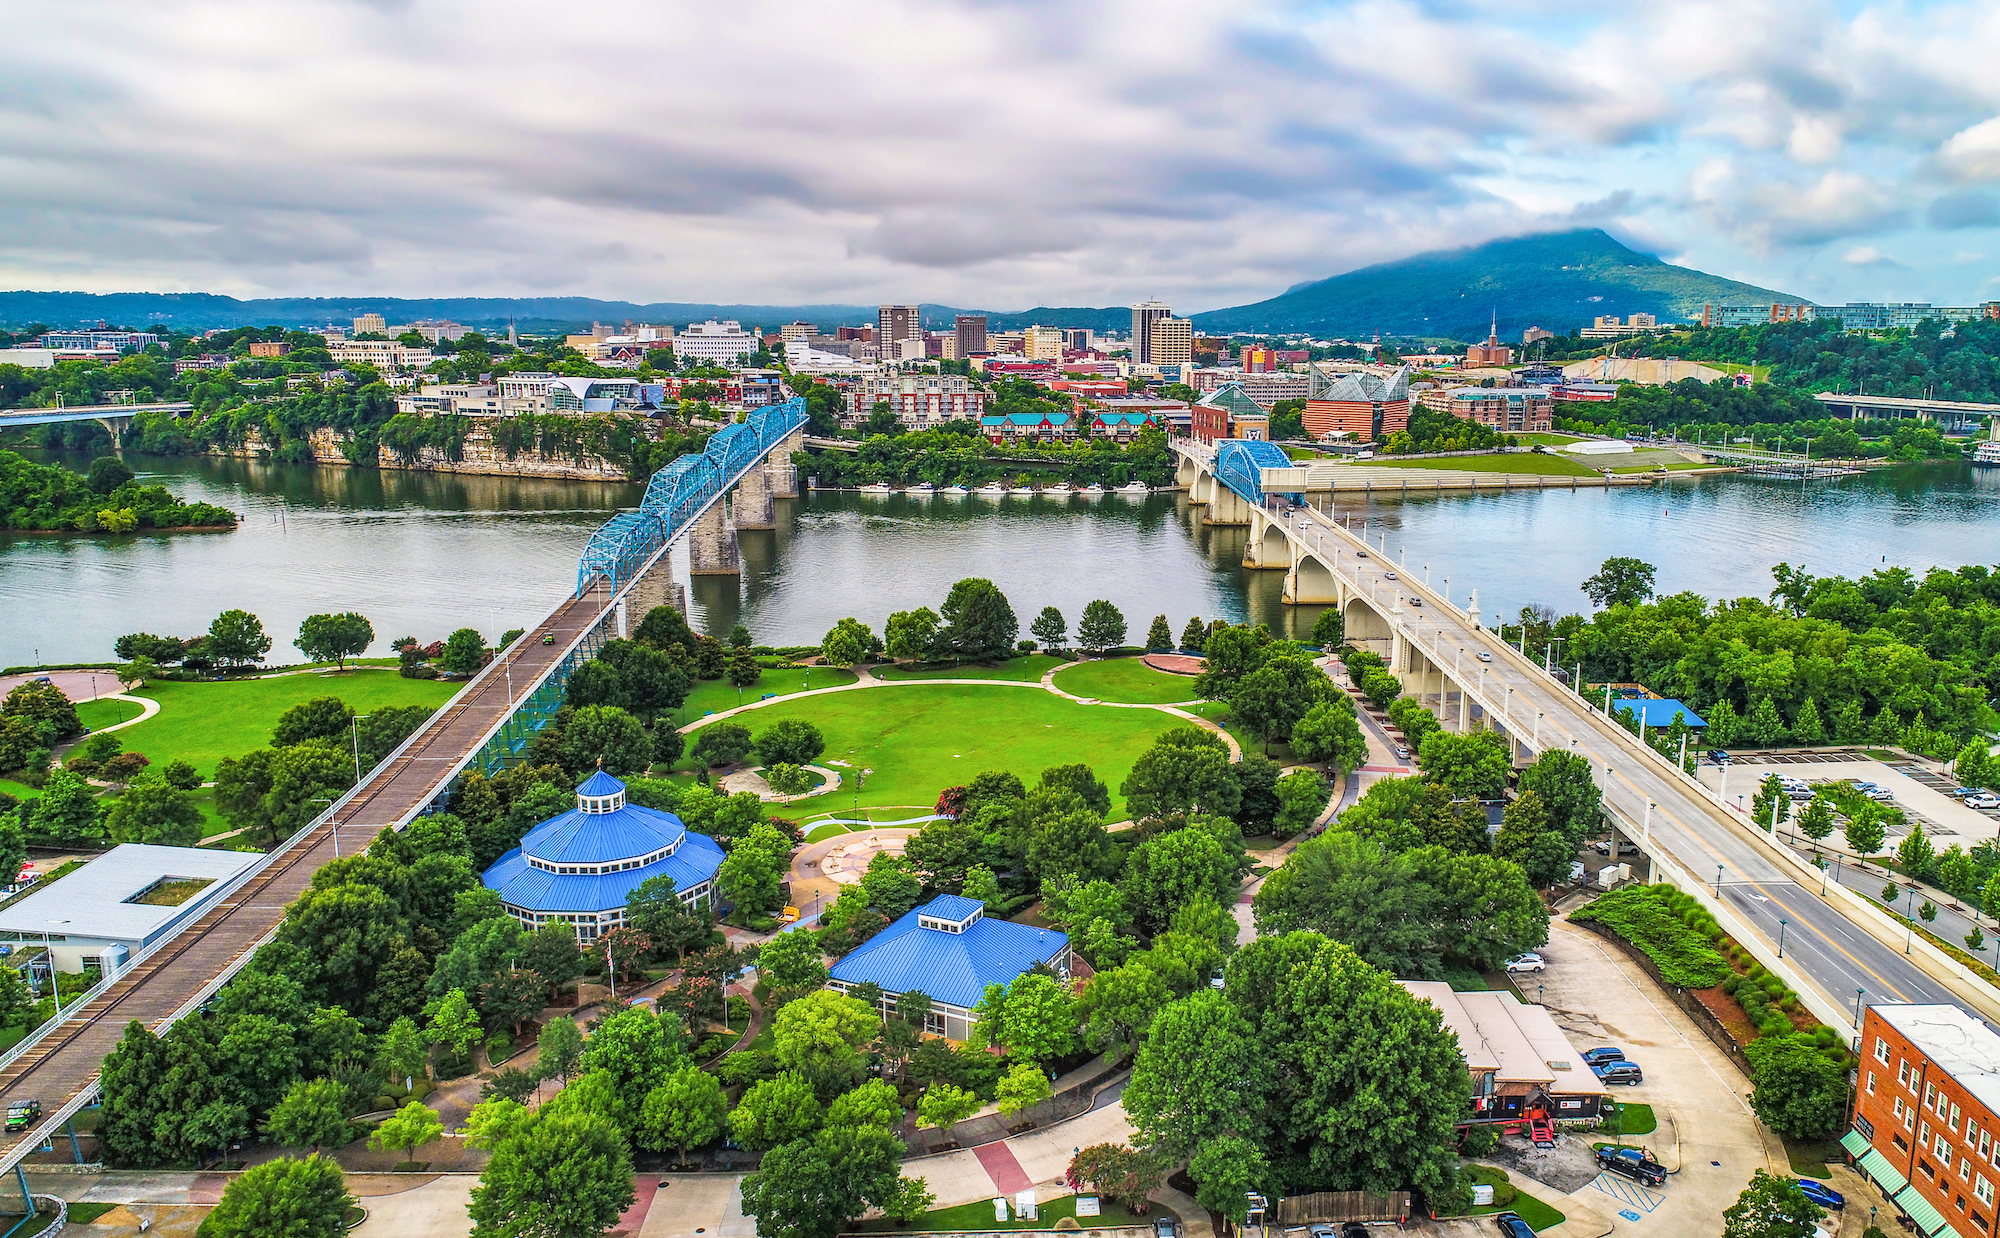 Chattanooga Attraction